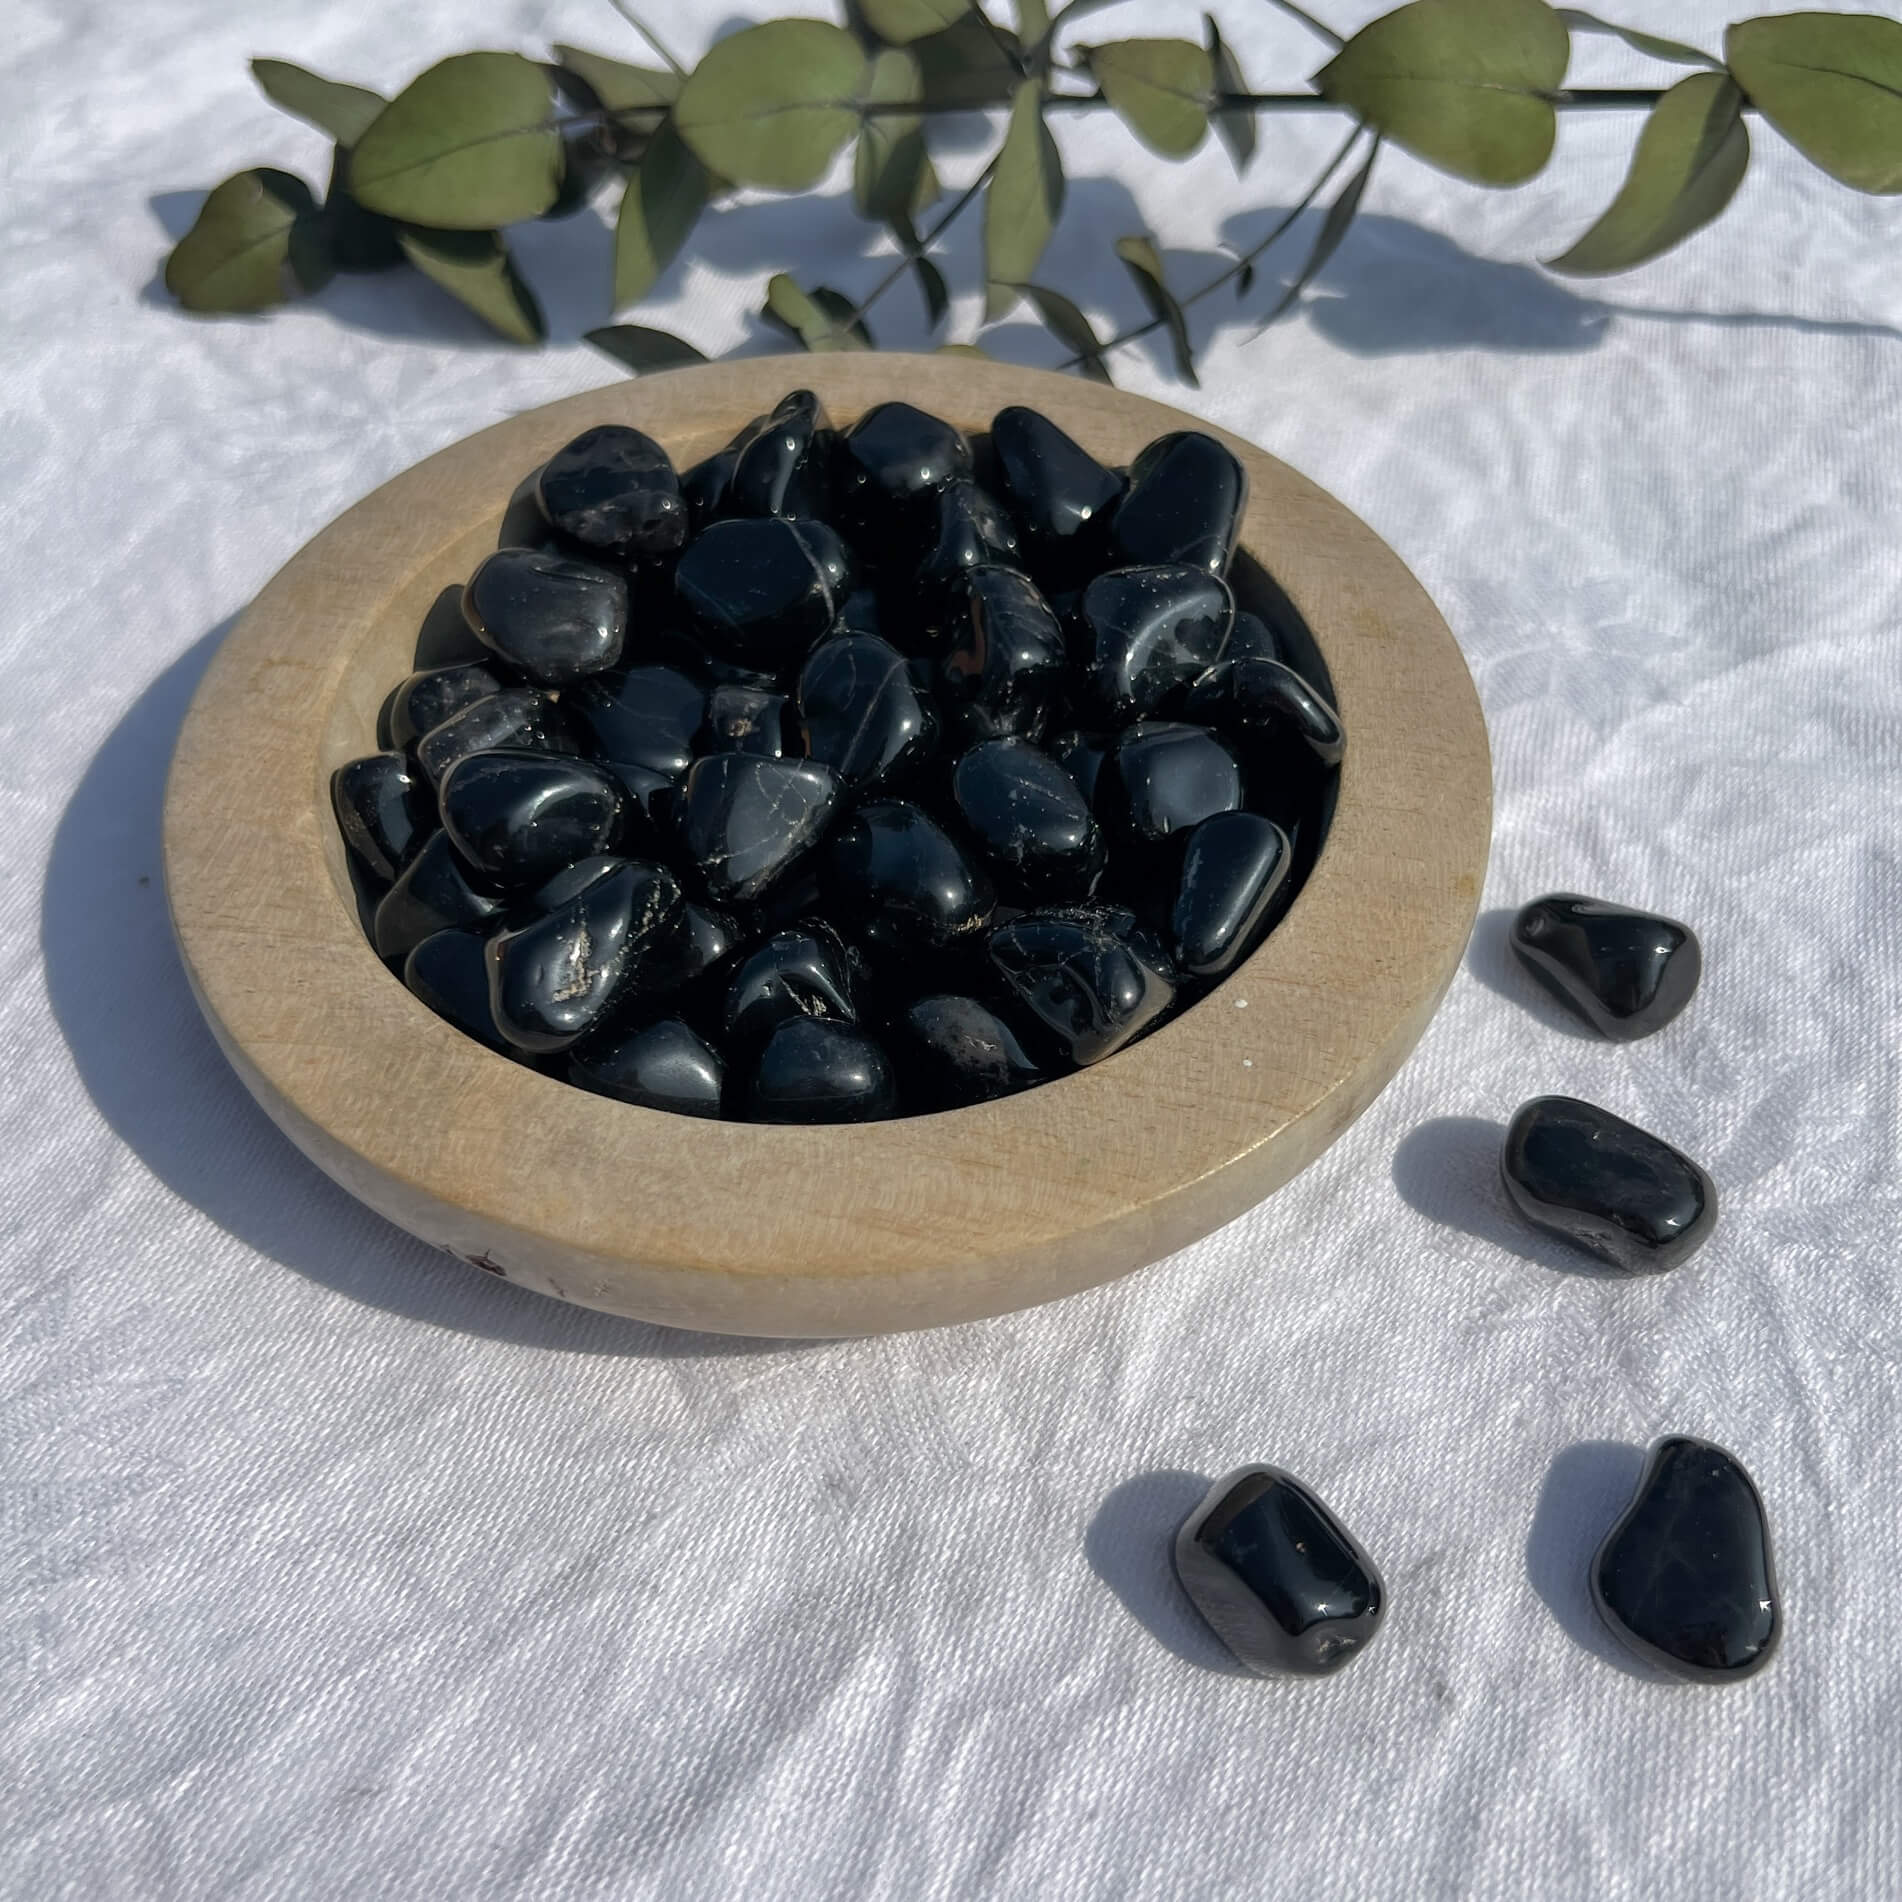 Wooden dish overflowing with small black tourmaline crystal tumblestones